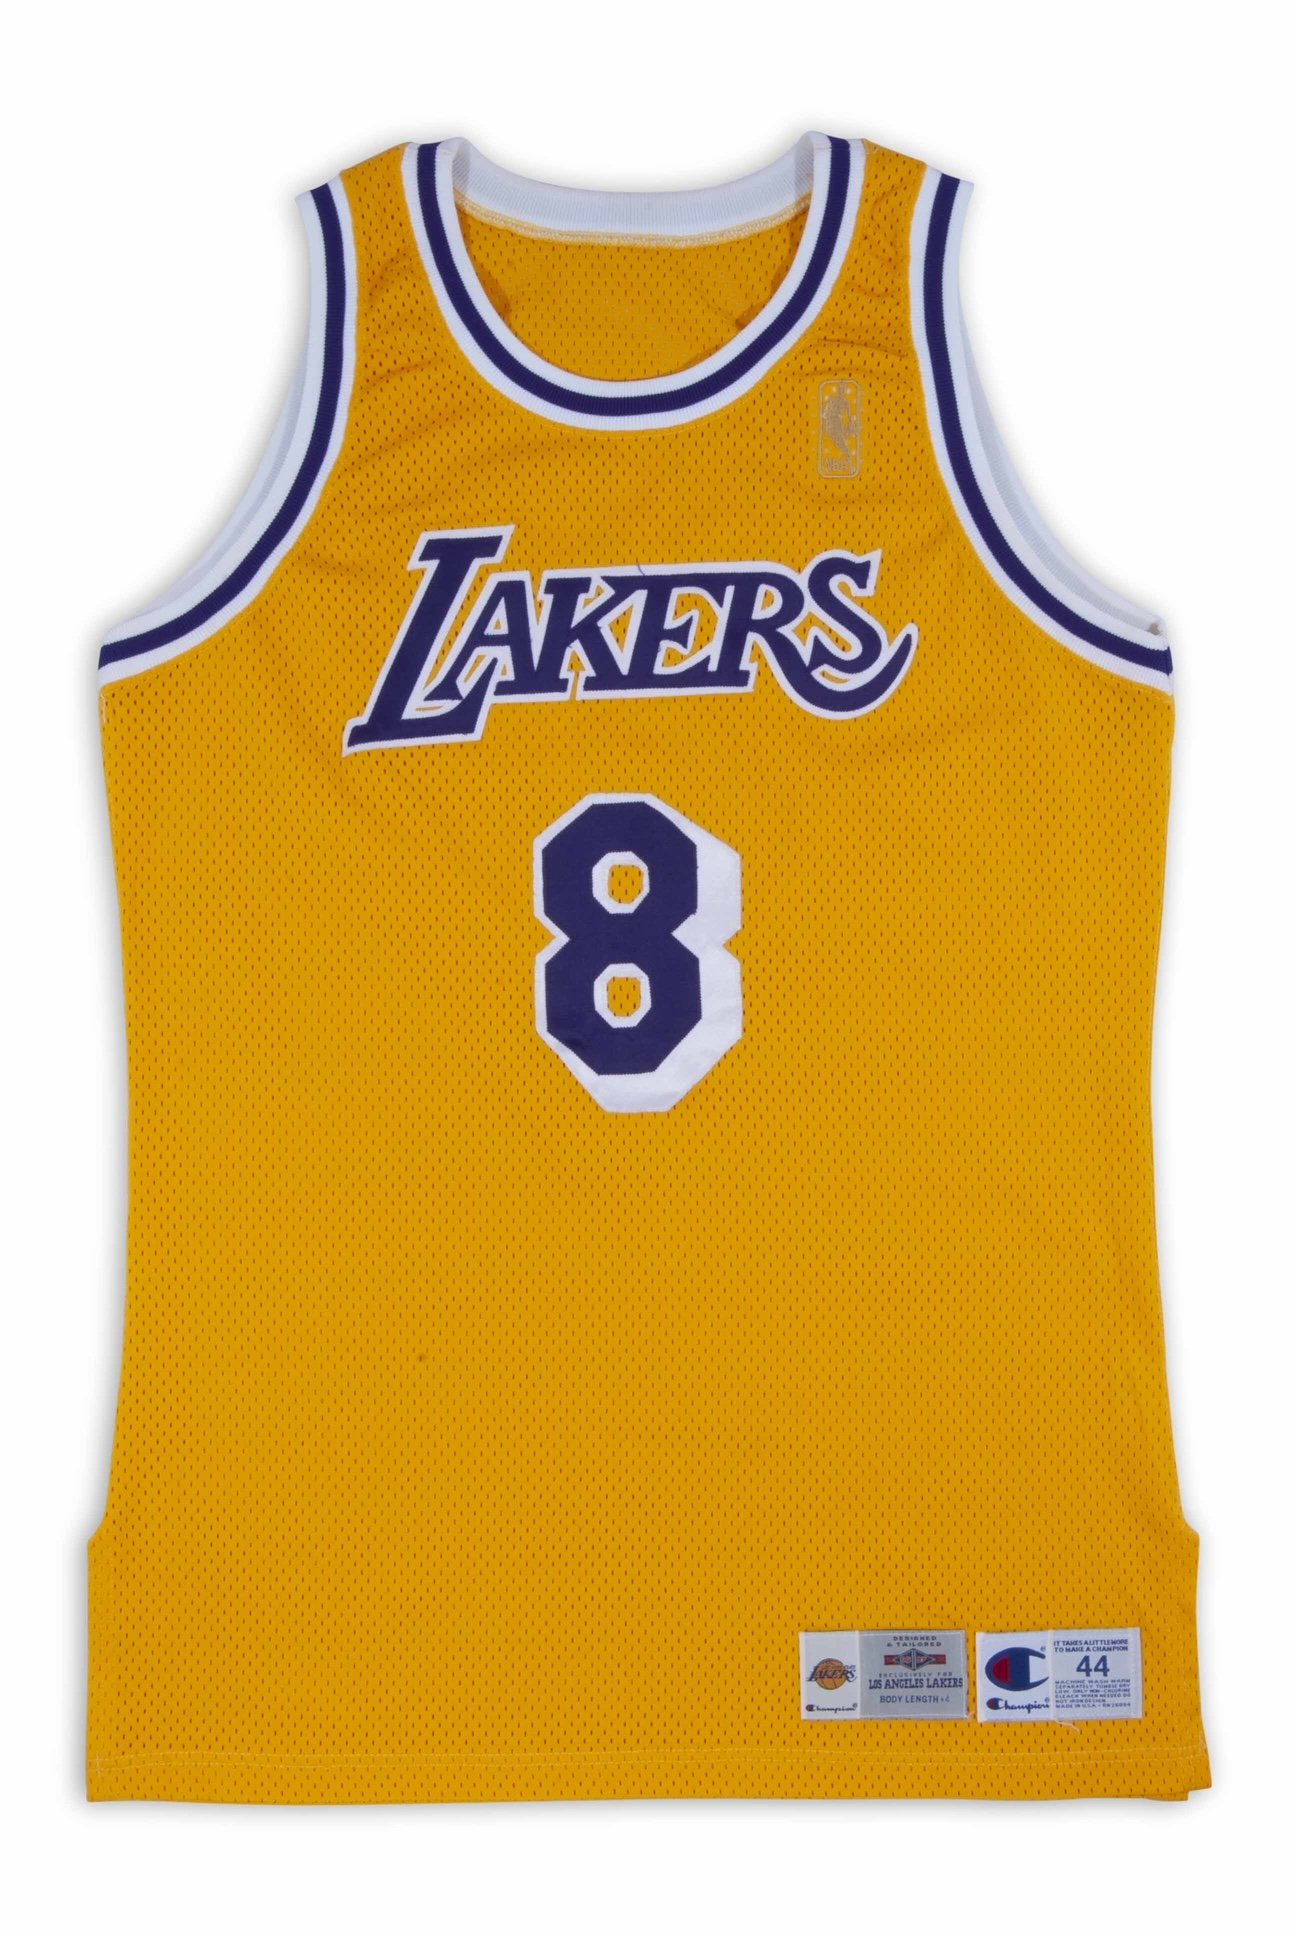 Kobe Bryant's rookie season jersey to be auctioned, could fetch $5M